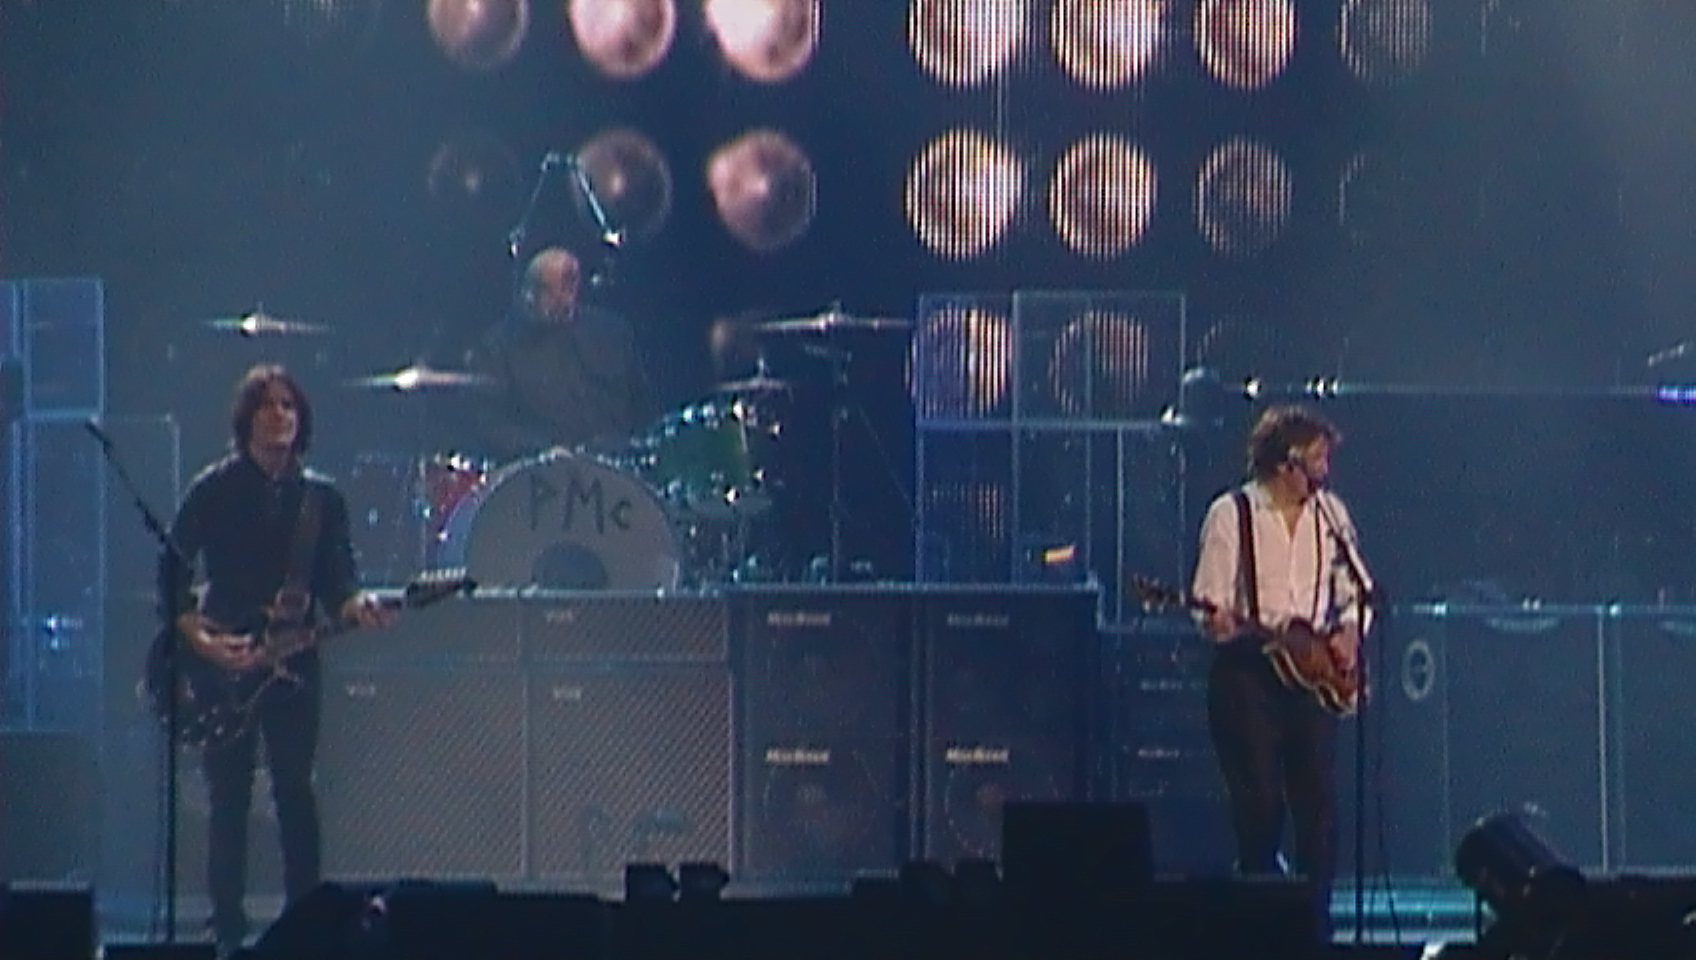 Rusty at left on electric guitar and Paul at right on bass, on a darkened stage, with Abe on drums in the background, for the Montreal 2010 show